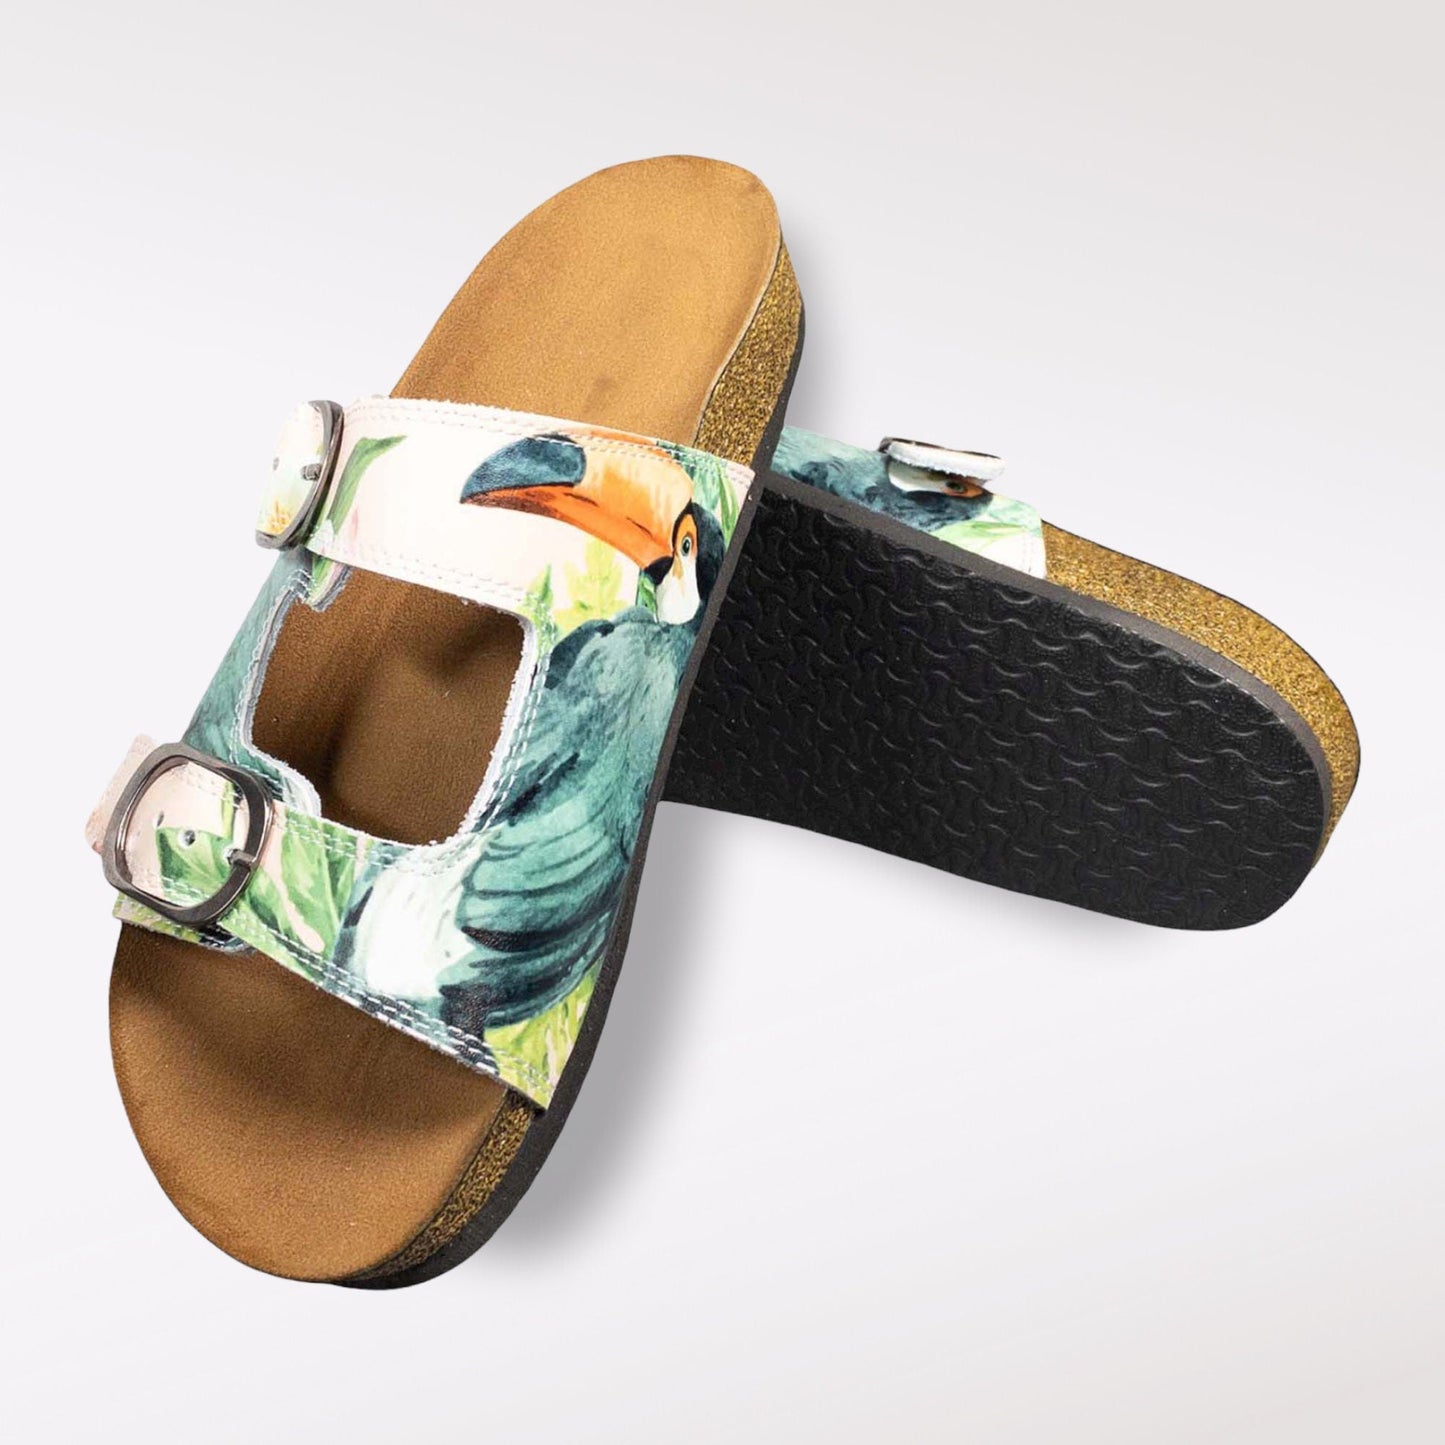 Tropical Leather Open Toe Sandals / Clogs / Slippers / Mules Double Band Handmade, Anti Slip, Anti-Bacterial